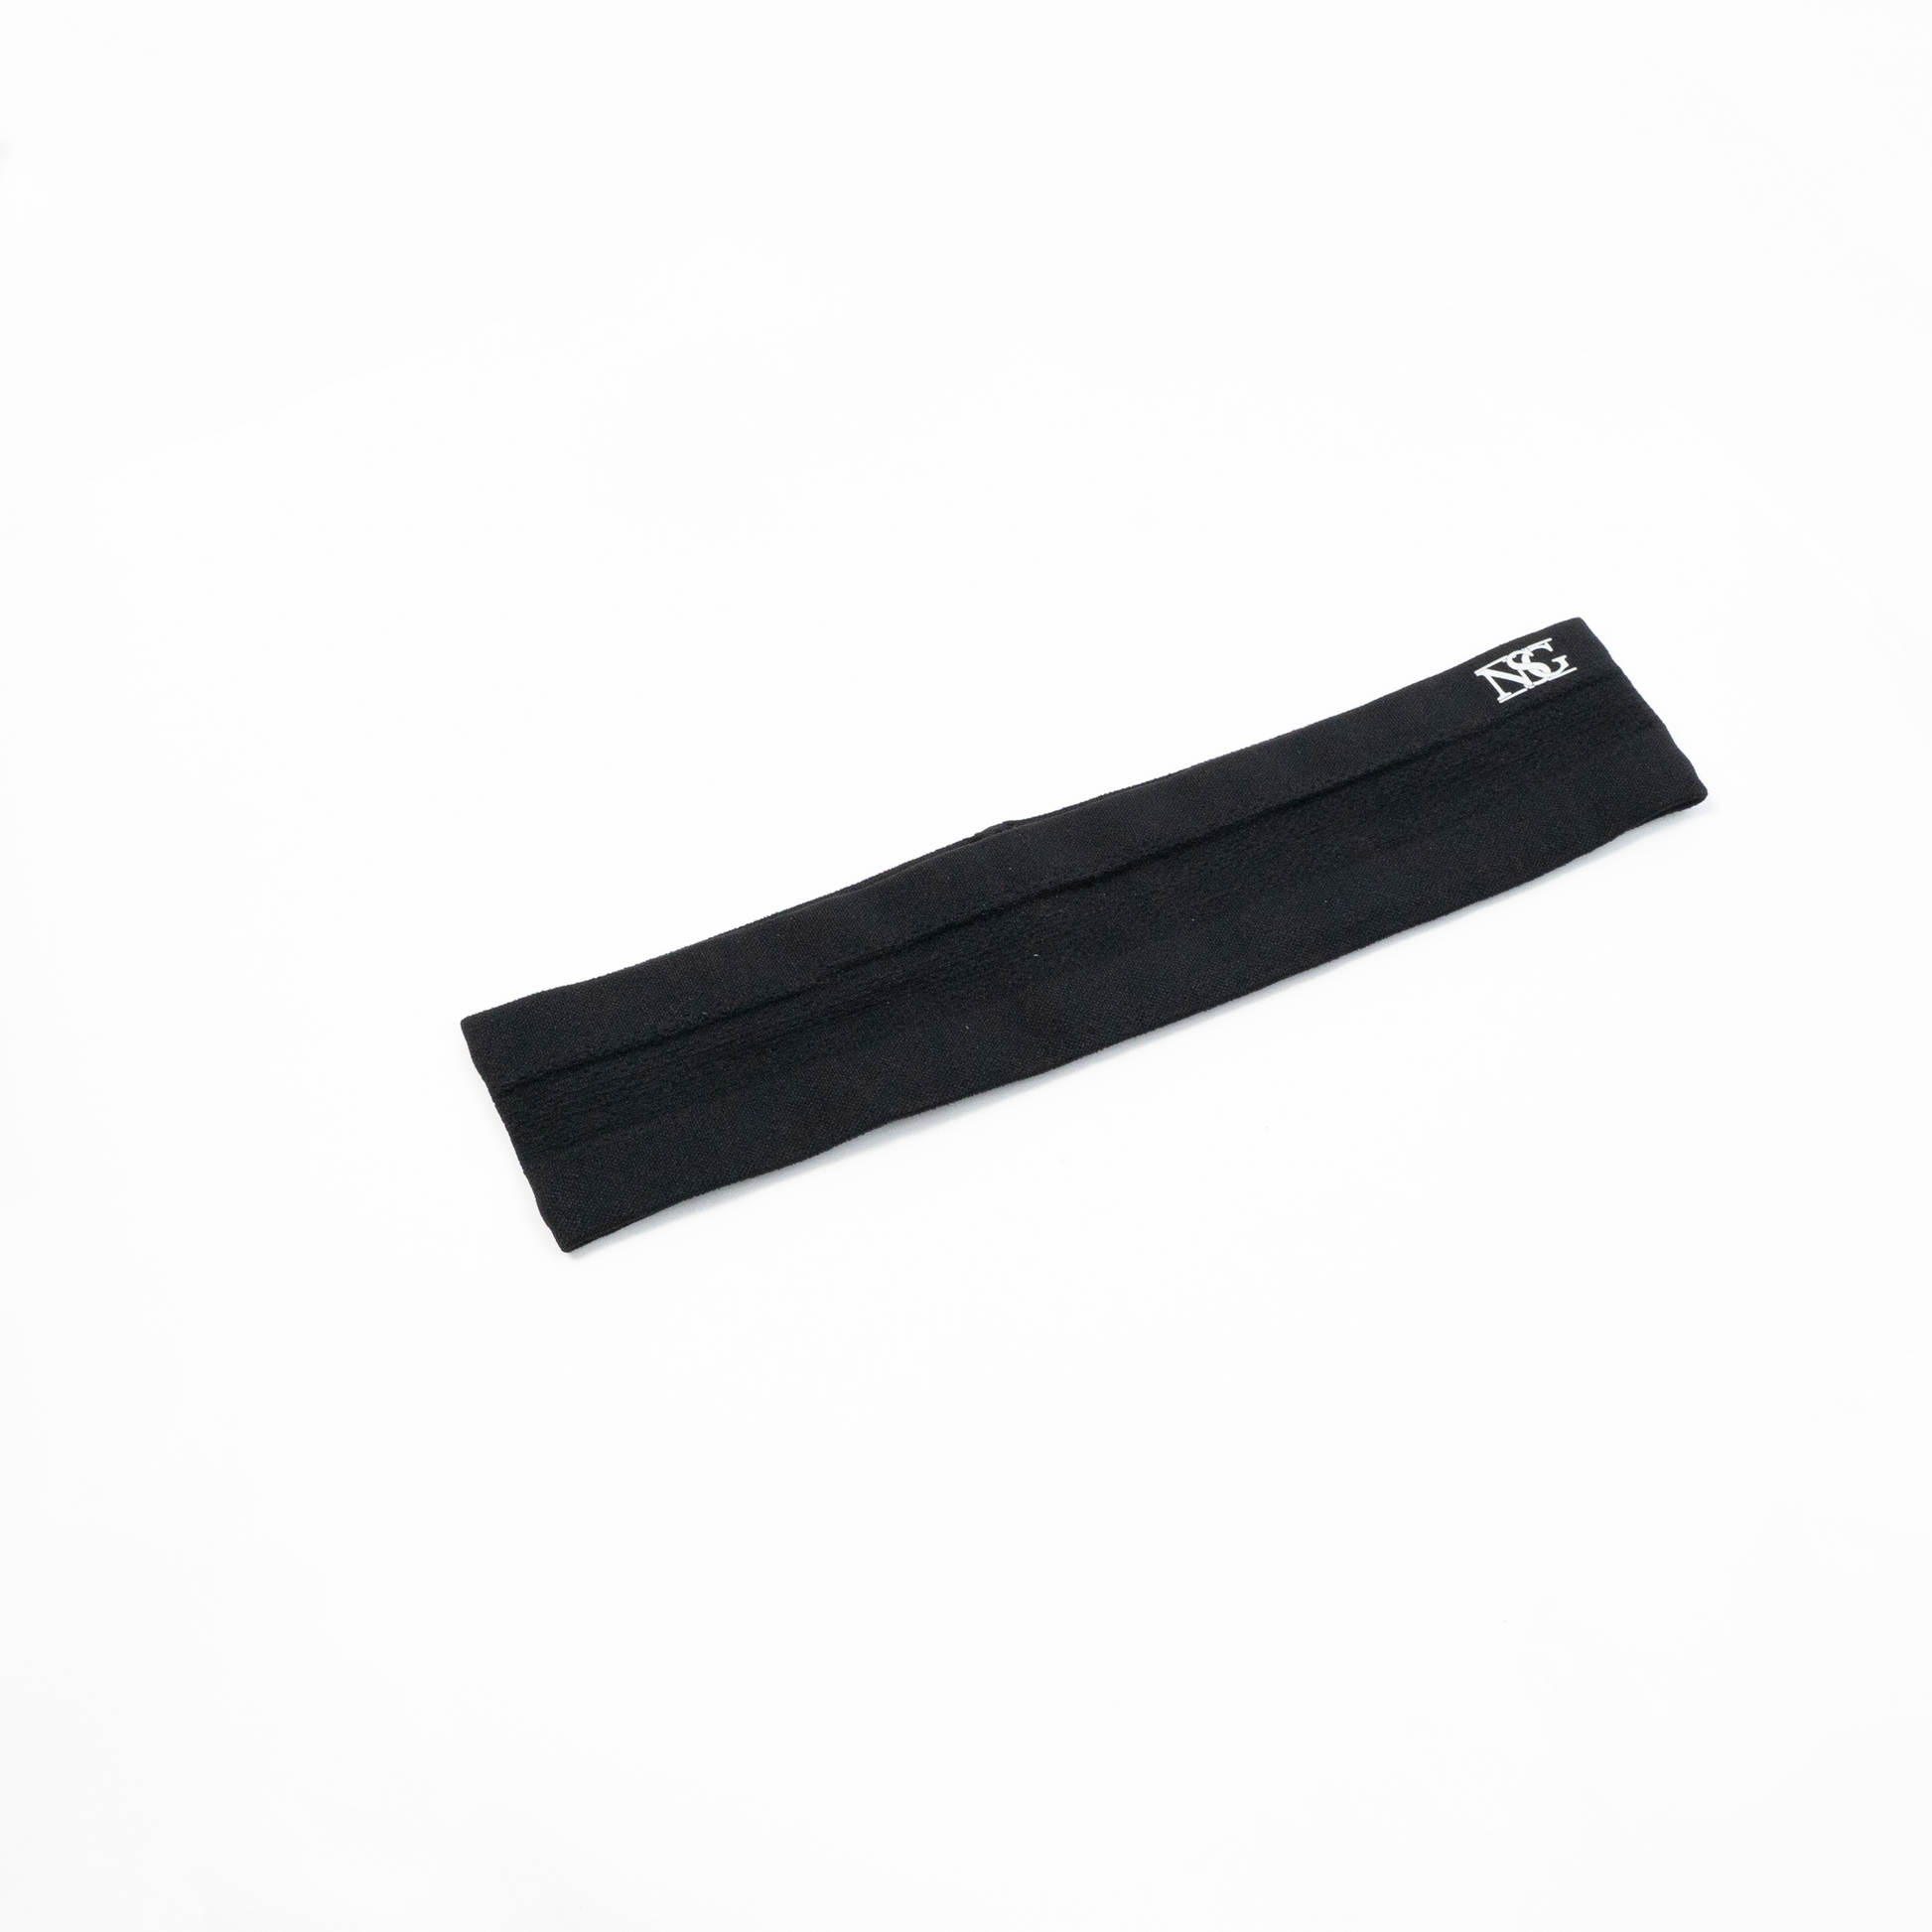 NSG Headband in white with stylish and comfortable design for workouts